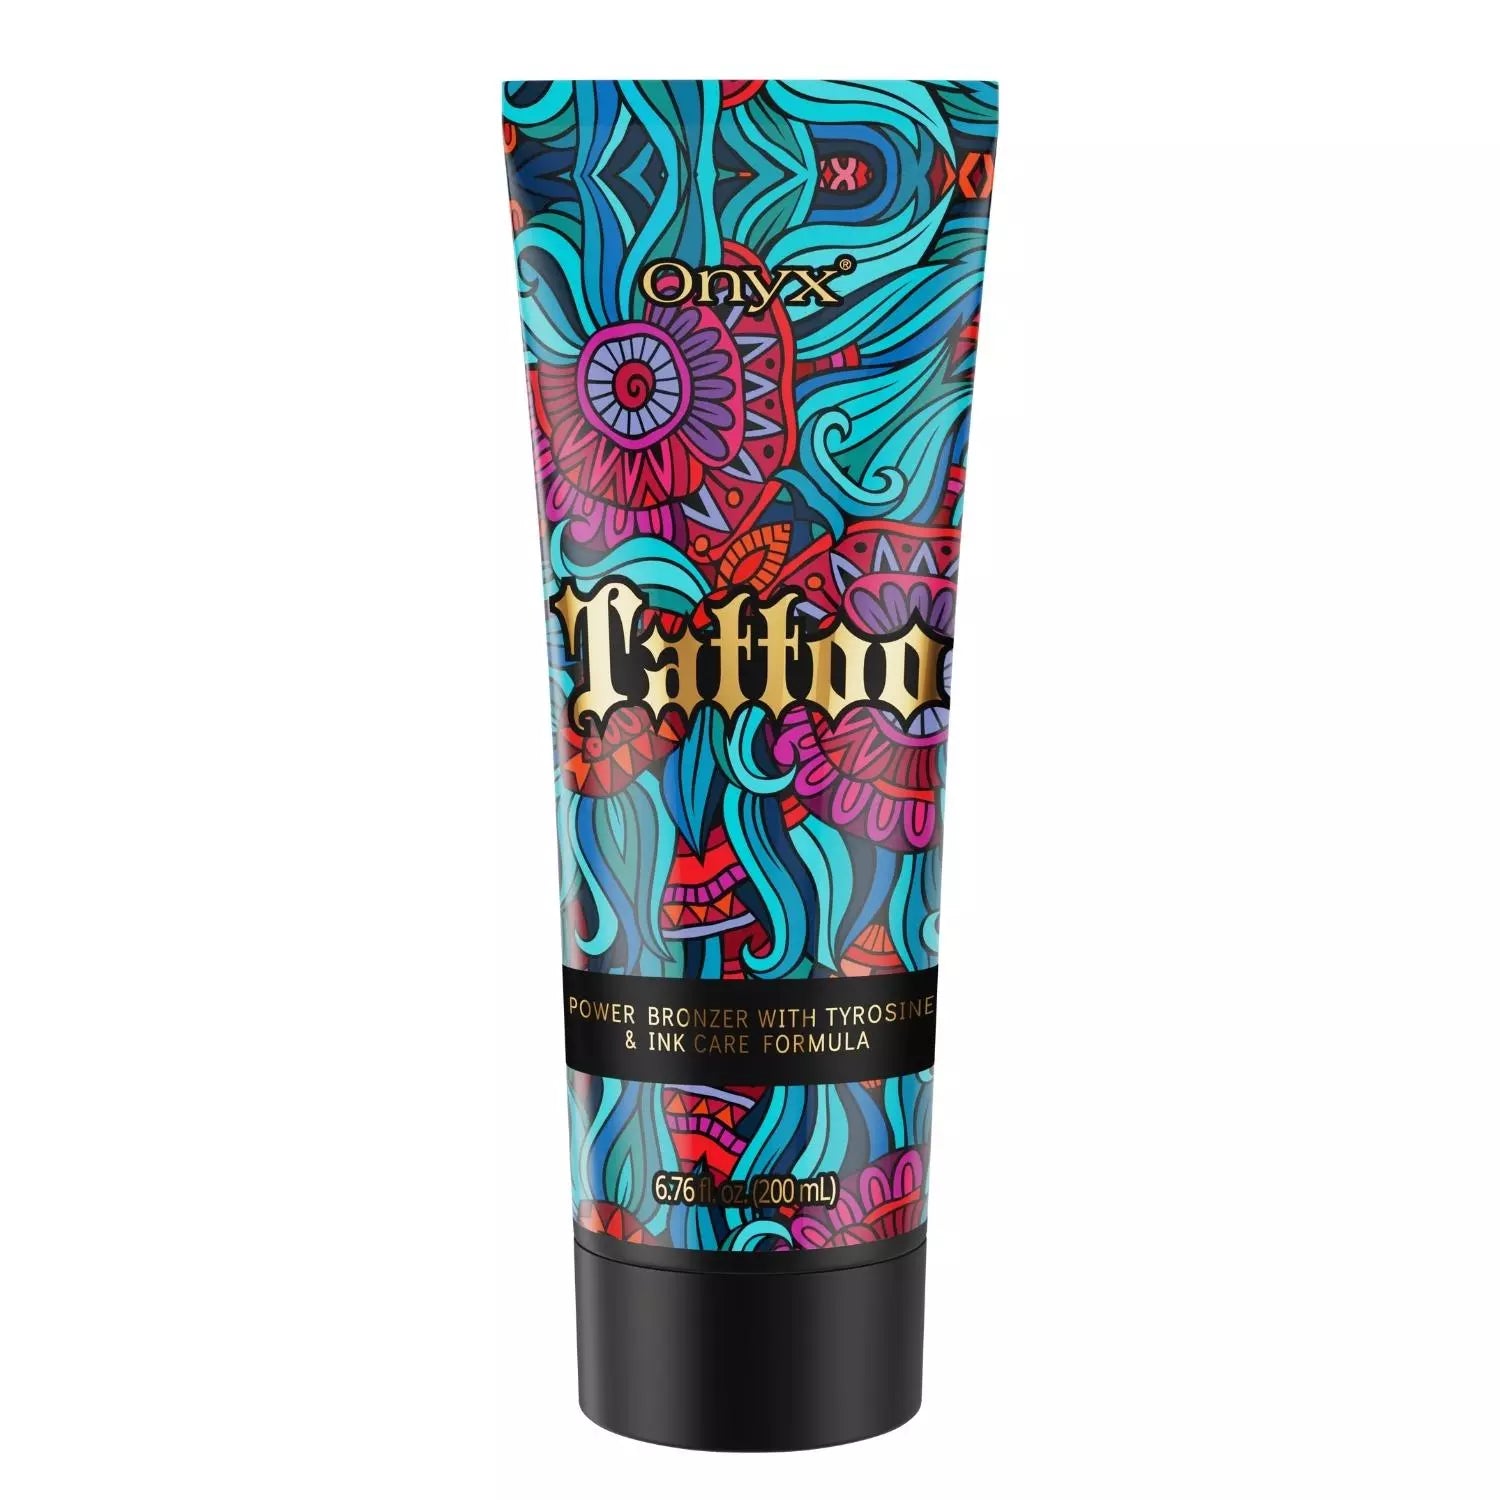 Tattoo tanning lotion protecting tattoos from tanning